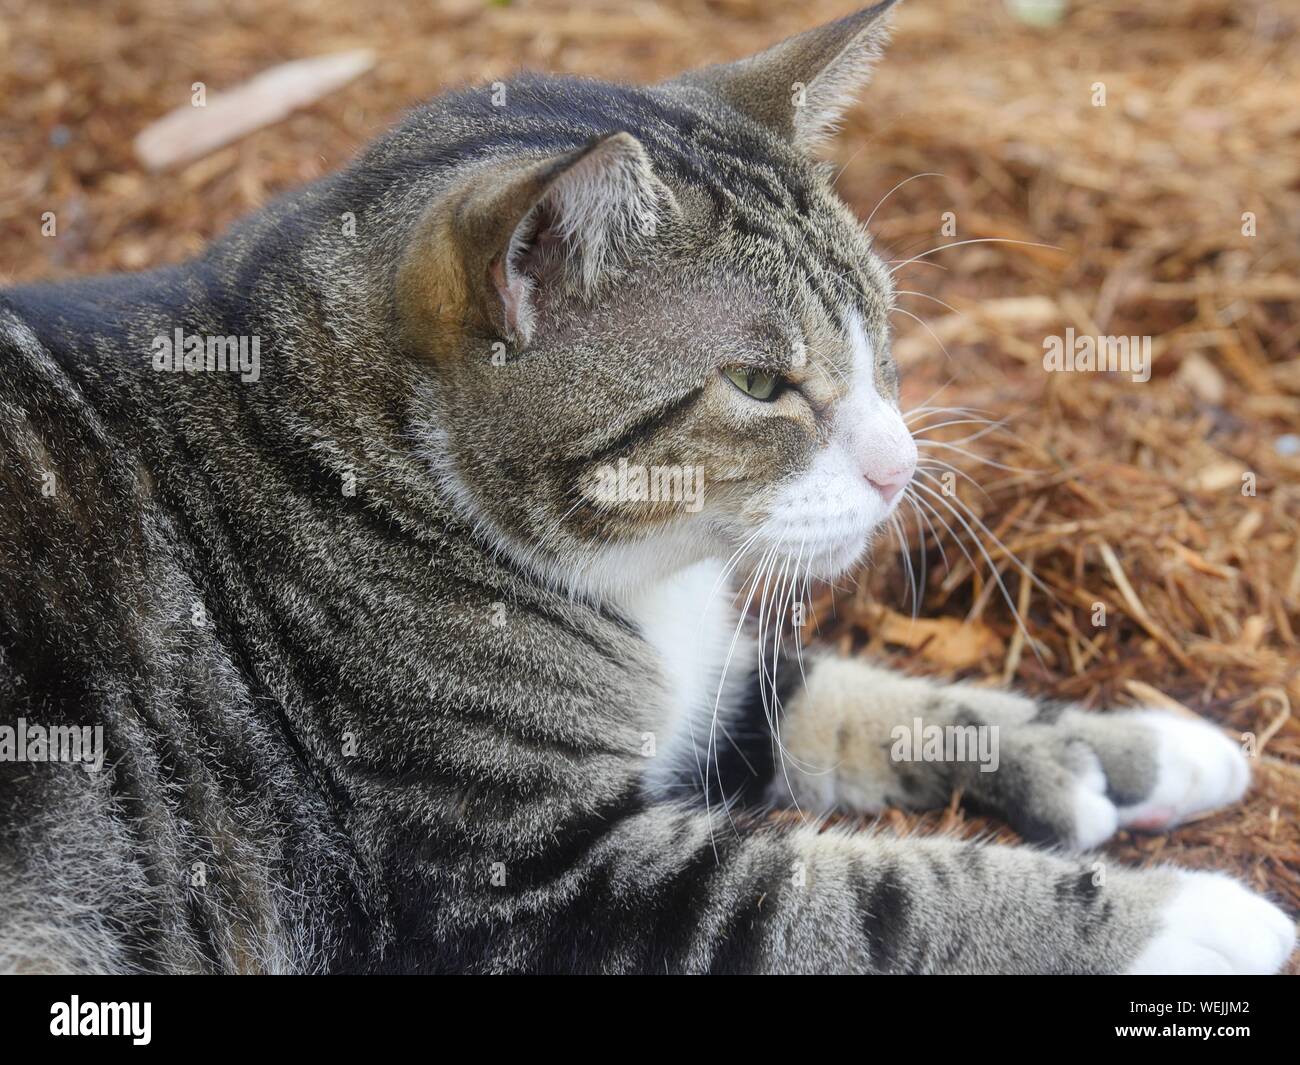 Close up, side view of a six-toed cat Stock Photo